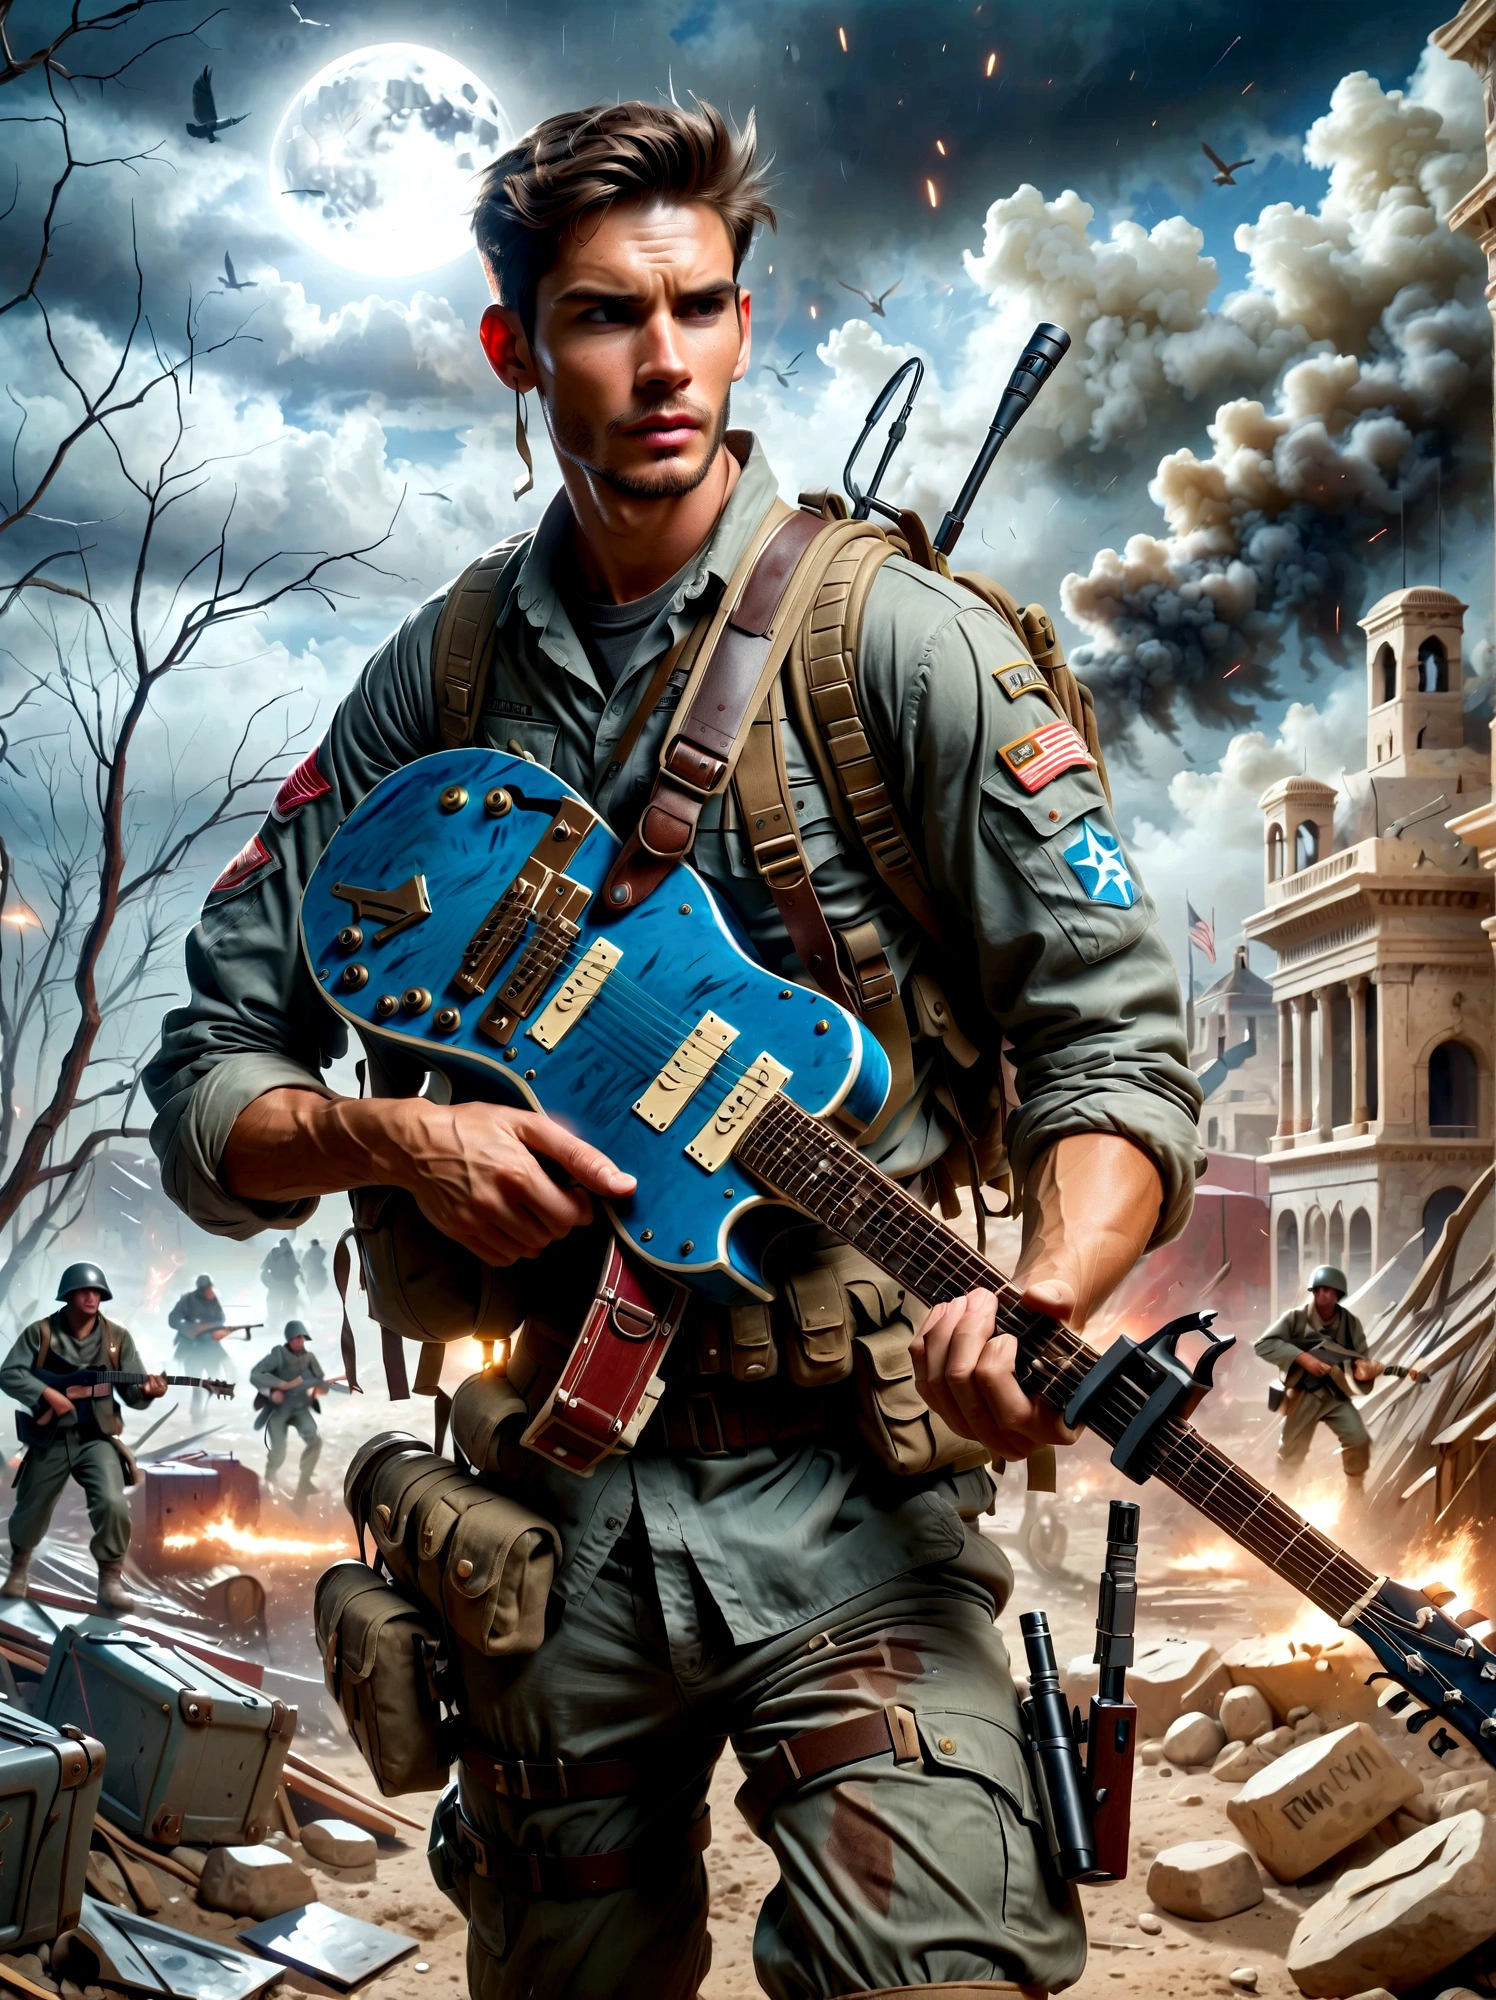 Brave soldiers，(holding an assault rifle: 1.3), (carrying a guitar on his back: 1.5), Fierce Battle，Battles with Israel&#39;s enemies，Harsh war conditions，Skirmishers，A month-long battle，battle scars，Shrapnel woundedal of Honor，rugged terrain，Fierce Battle，Determined expression，Realistic details，War-torn environment，Heroic Act，Muddy and worn out，Smoke and debris，Dramatic lighting，Vivid colors，Highly detailed epic battle sceneasterpiece：2)，best quality，Super high altitude，original，Extremely detailed，Perfect lighting。